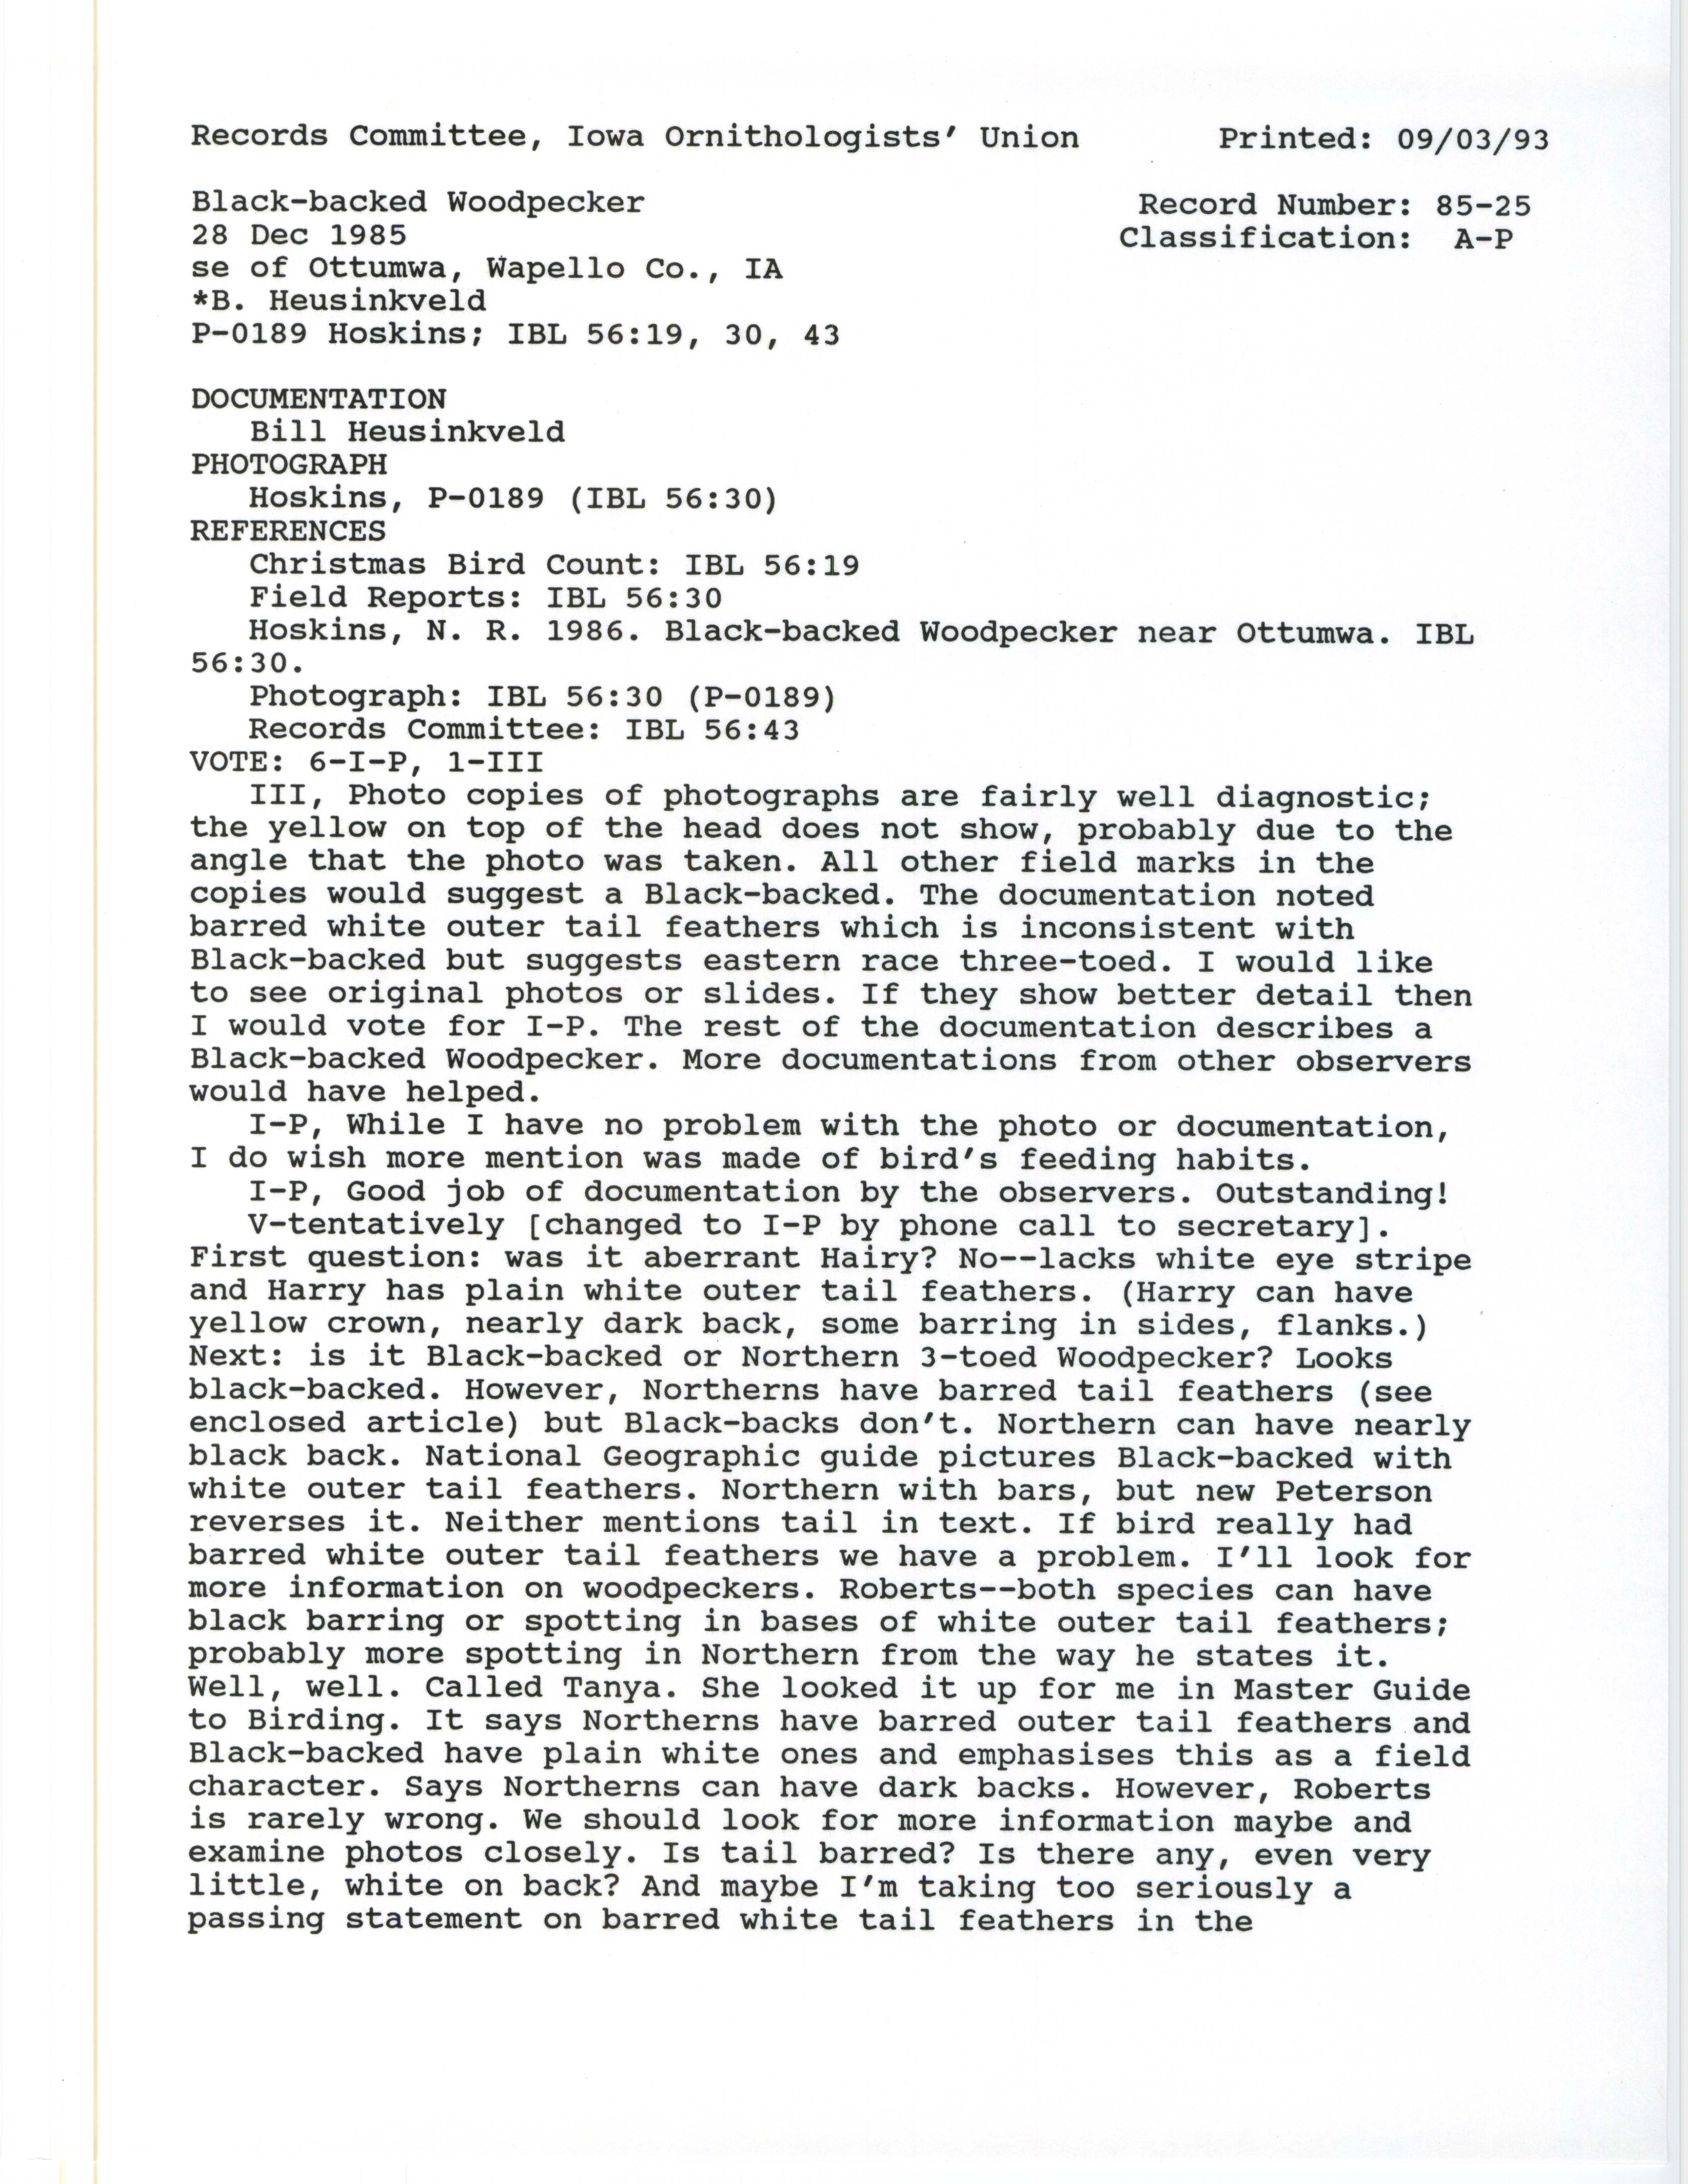 Records Committee review for rare bird sighting for Black-backed Woodpecker at Camp Arrowhead near Ottumwa, 1985